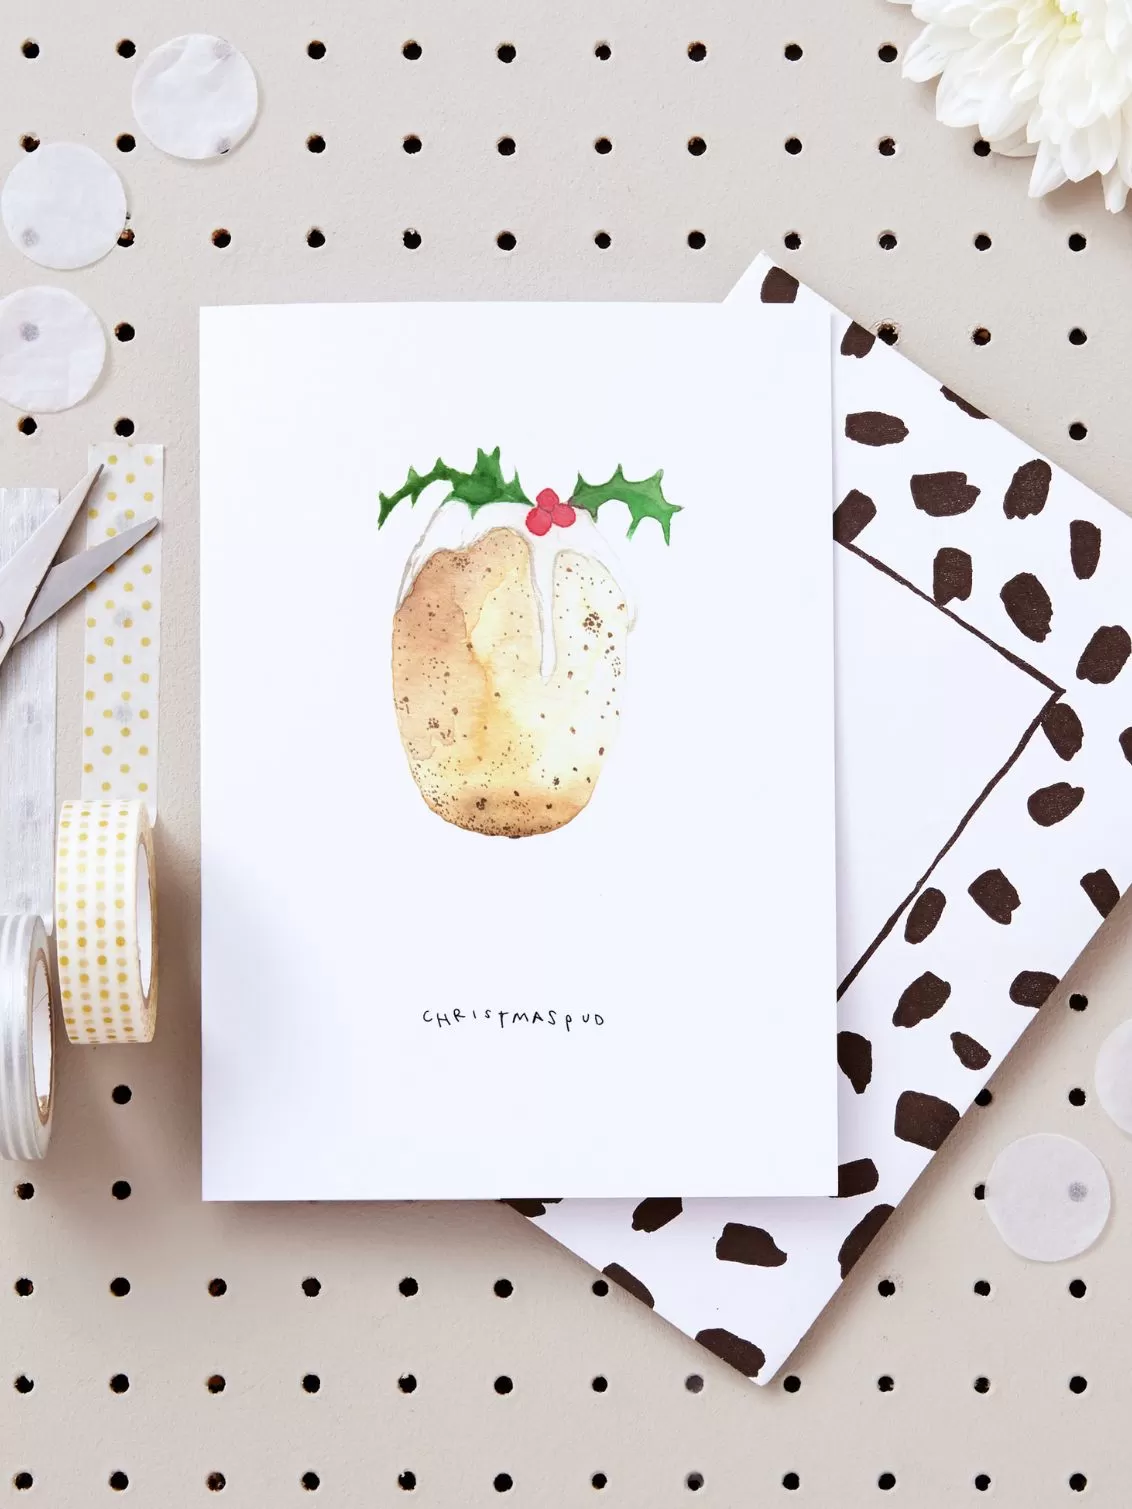 Blank Inside Christmas Pud Card seen with a black and white envelope.